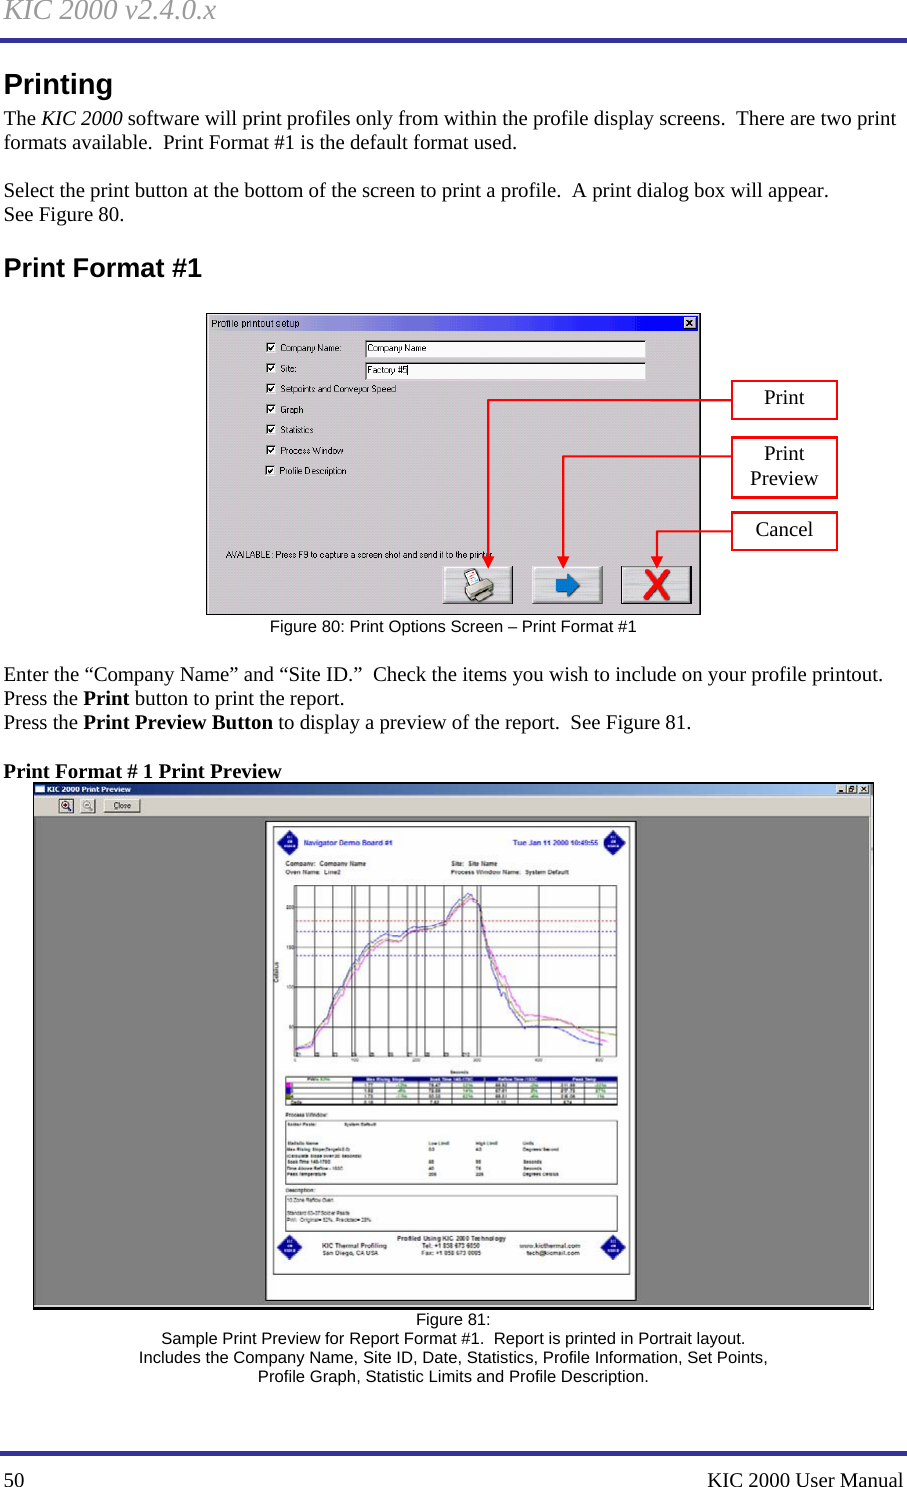 KIC 2000 v2.4.0.x 50    KIC 2000 User Manual Printing The KIC 2000 software will print profiles only from within the profile display screens.  There are two print formats available.  Print Format #1 is the default format used.  Select the print button at the bottom of the screen to print a profile.  A print dialog box will appear. See Figure 80.   Print Format #1   Figure 80: Print Options Screen – Print Format #1  Enter the “Company Name” and “Site ID.”  Check the items you wish to include on your profile printout. Press the Print button to print the report. Press the Print Preview Button to display a preview of the report.  See Figure 81.    Print Format # 1 Print Preview  Figure 81: Sample Print Preview for Report Format #1.  Report is printed in Portrait layout. Includes the Company Name, Site ID, Date, Statistics, Profile Information, Set Points, Profile Graph, Statistic Limits and Profile Description.  Print Print Preview Cancel 